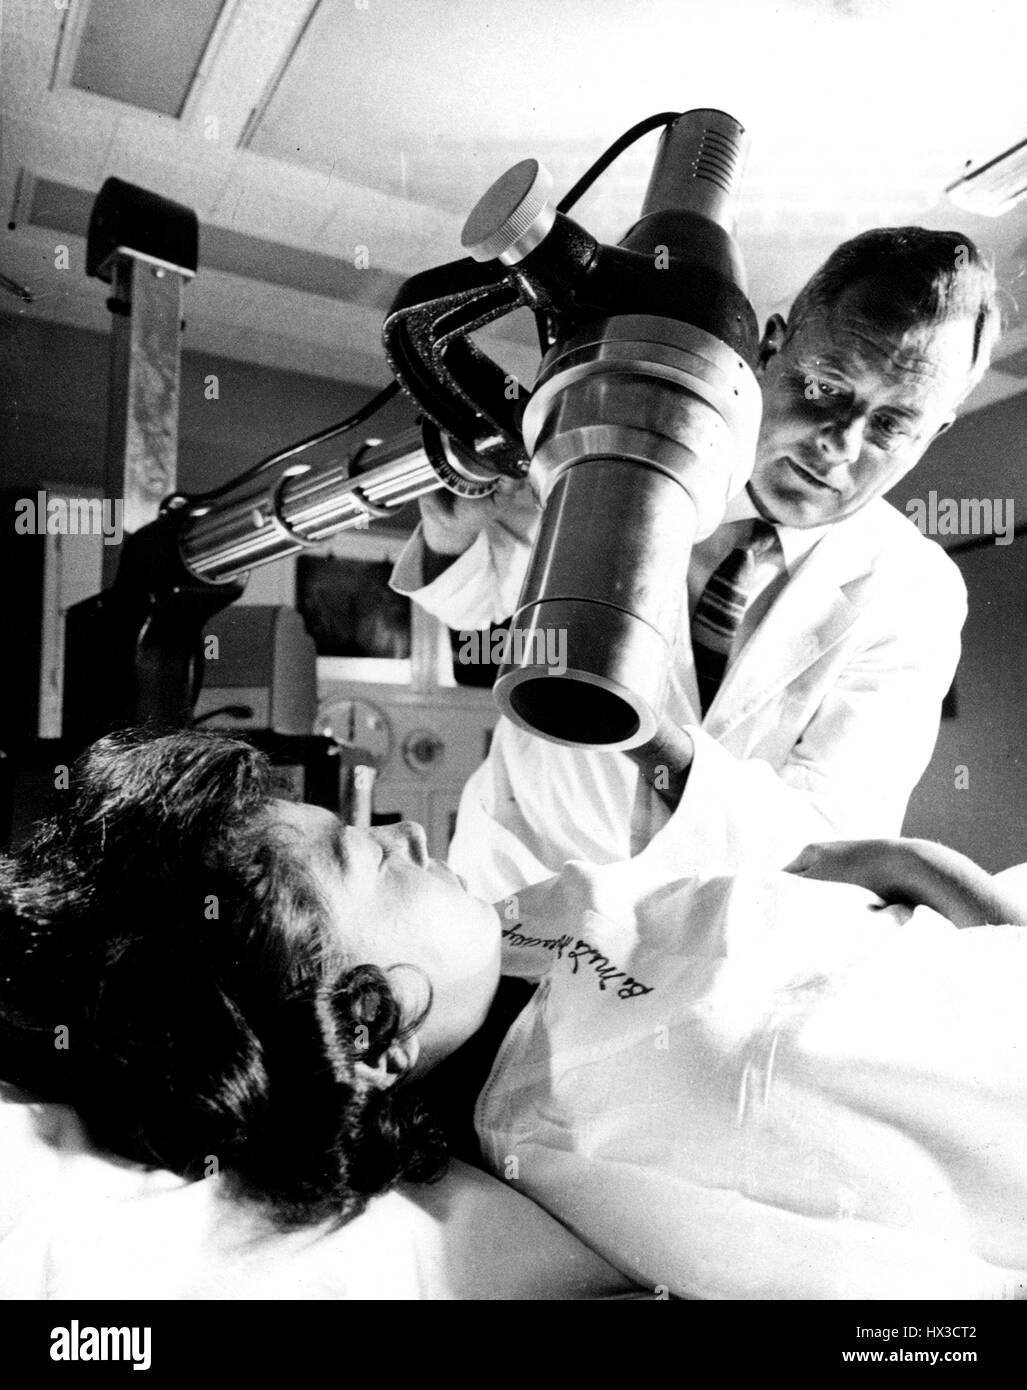 Measurement of the uptake of radioactive iodine in the thyroid gland of a patient, 1965. Image courtesy US Department of Energy. Stock Photo